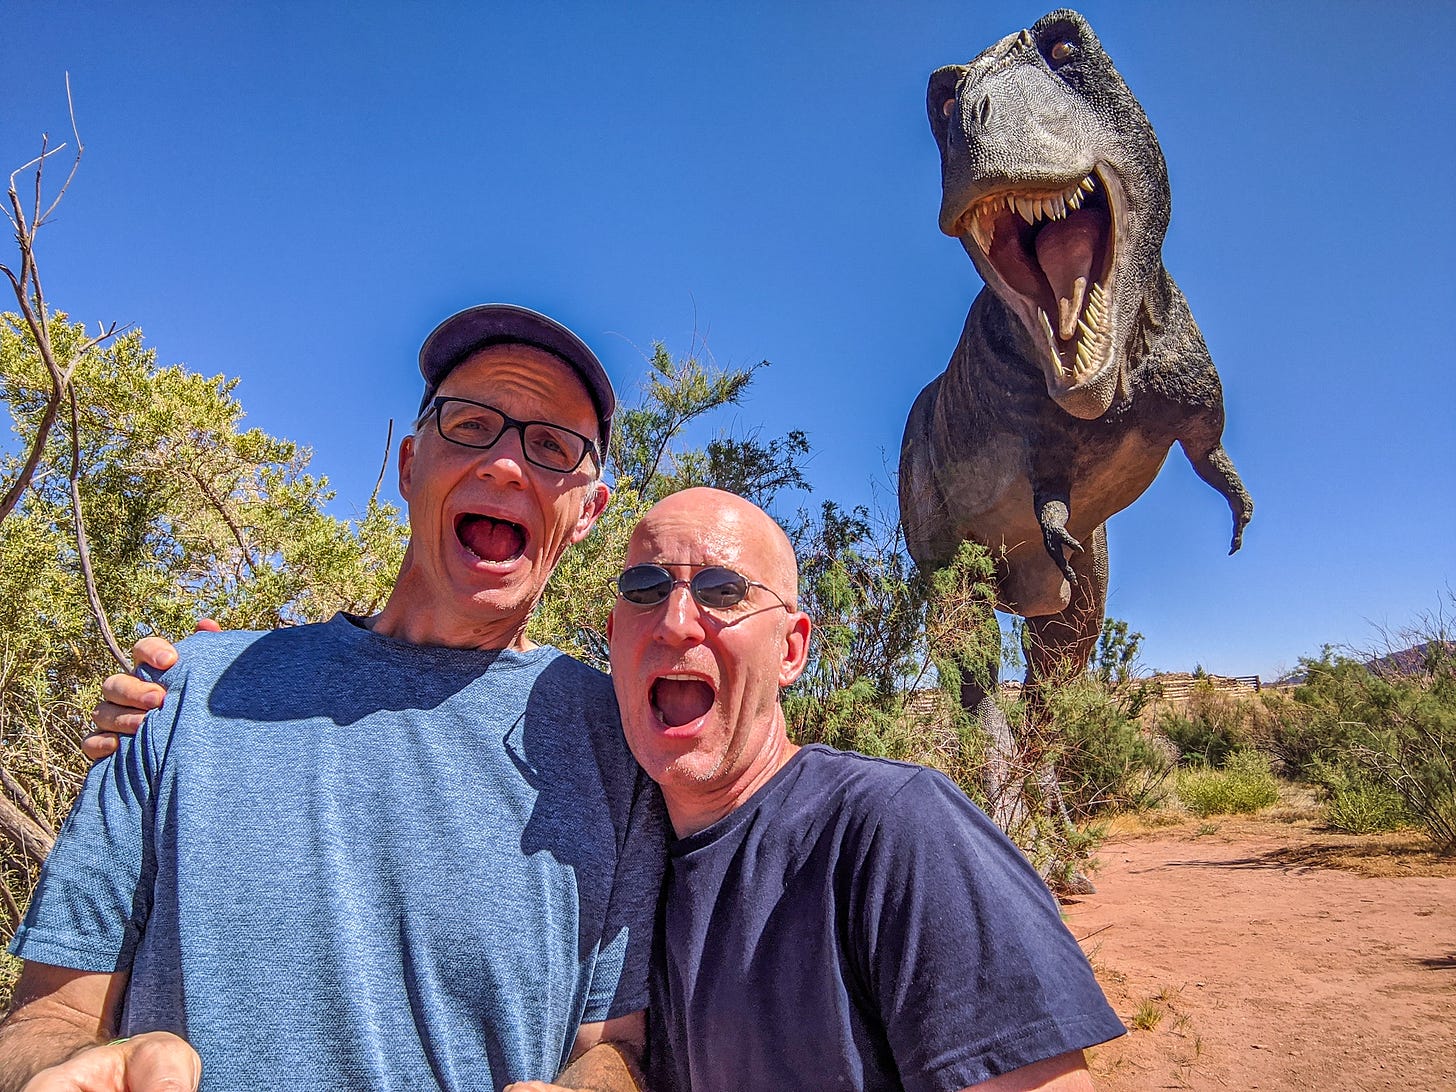 Brent and Michael being chased by a dinosaur!